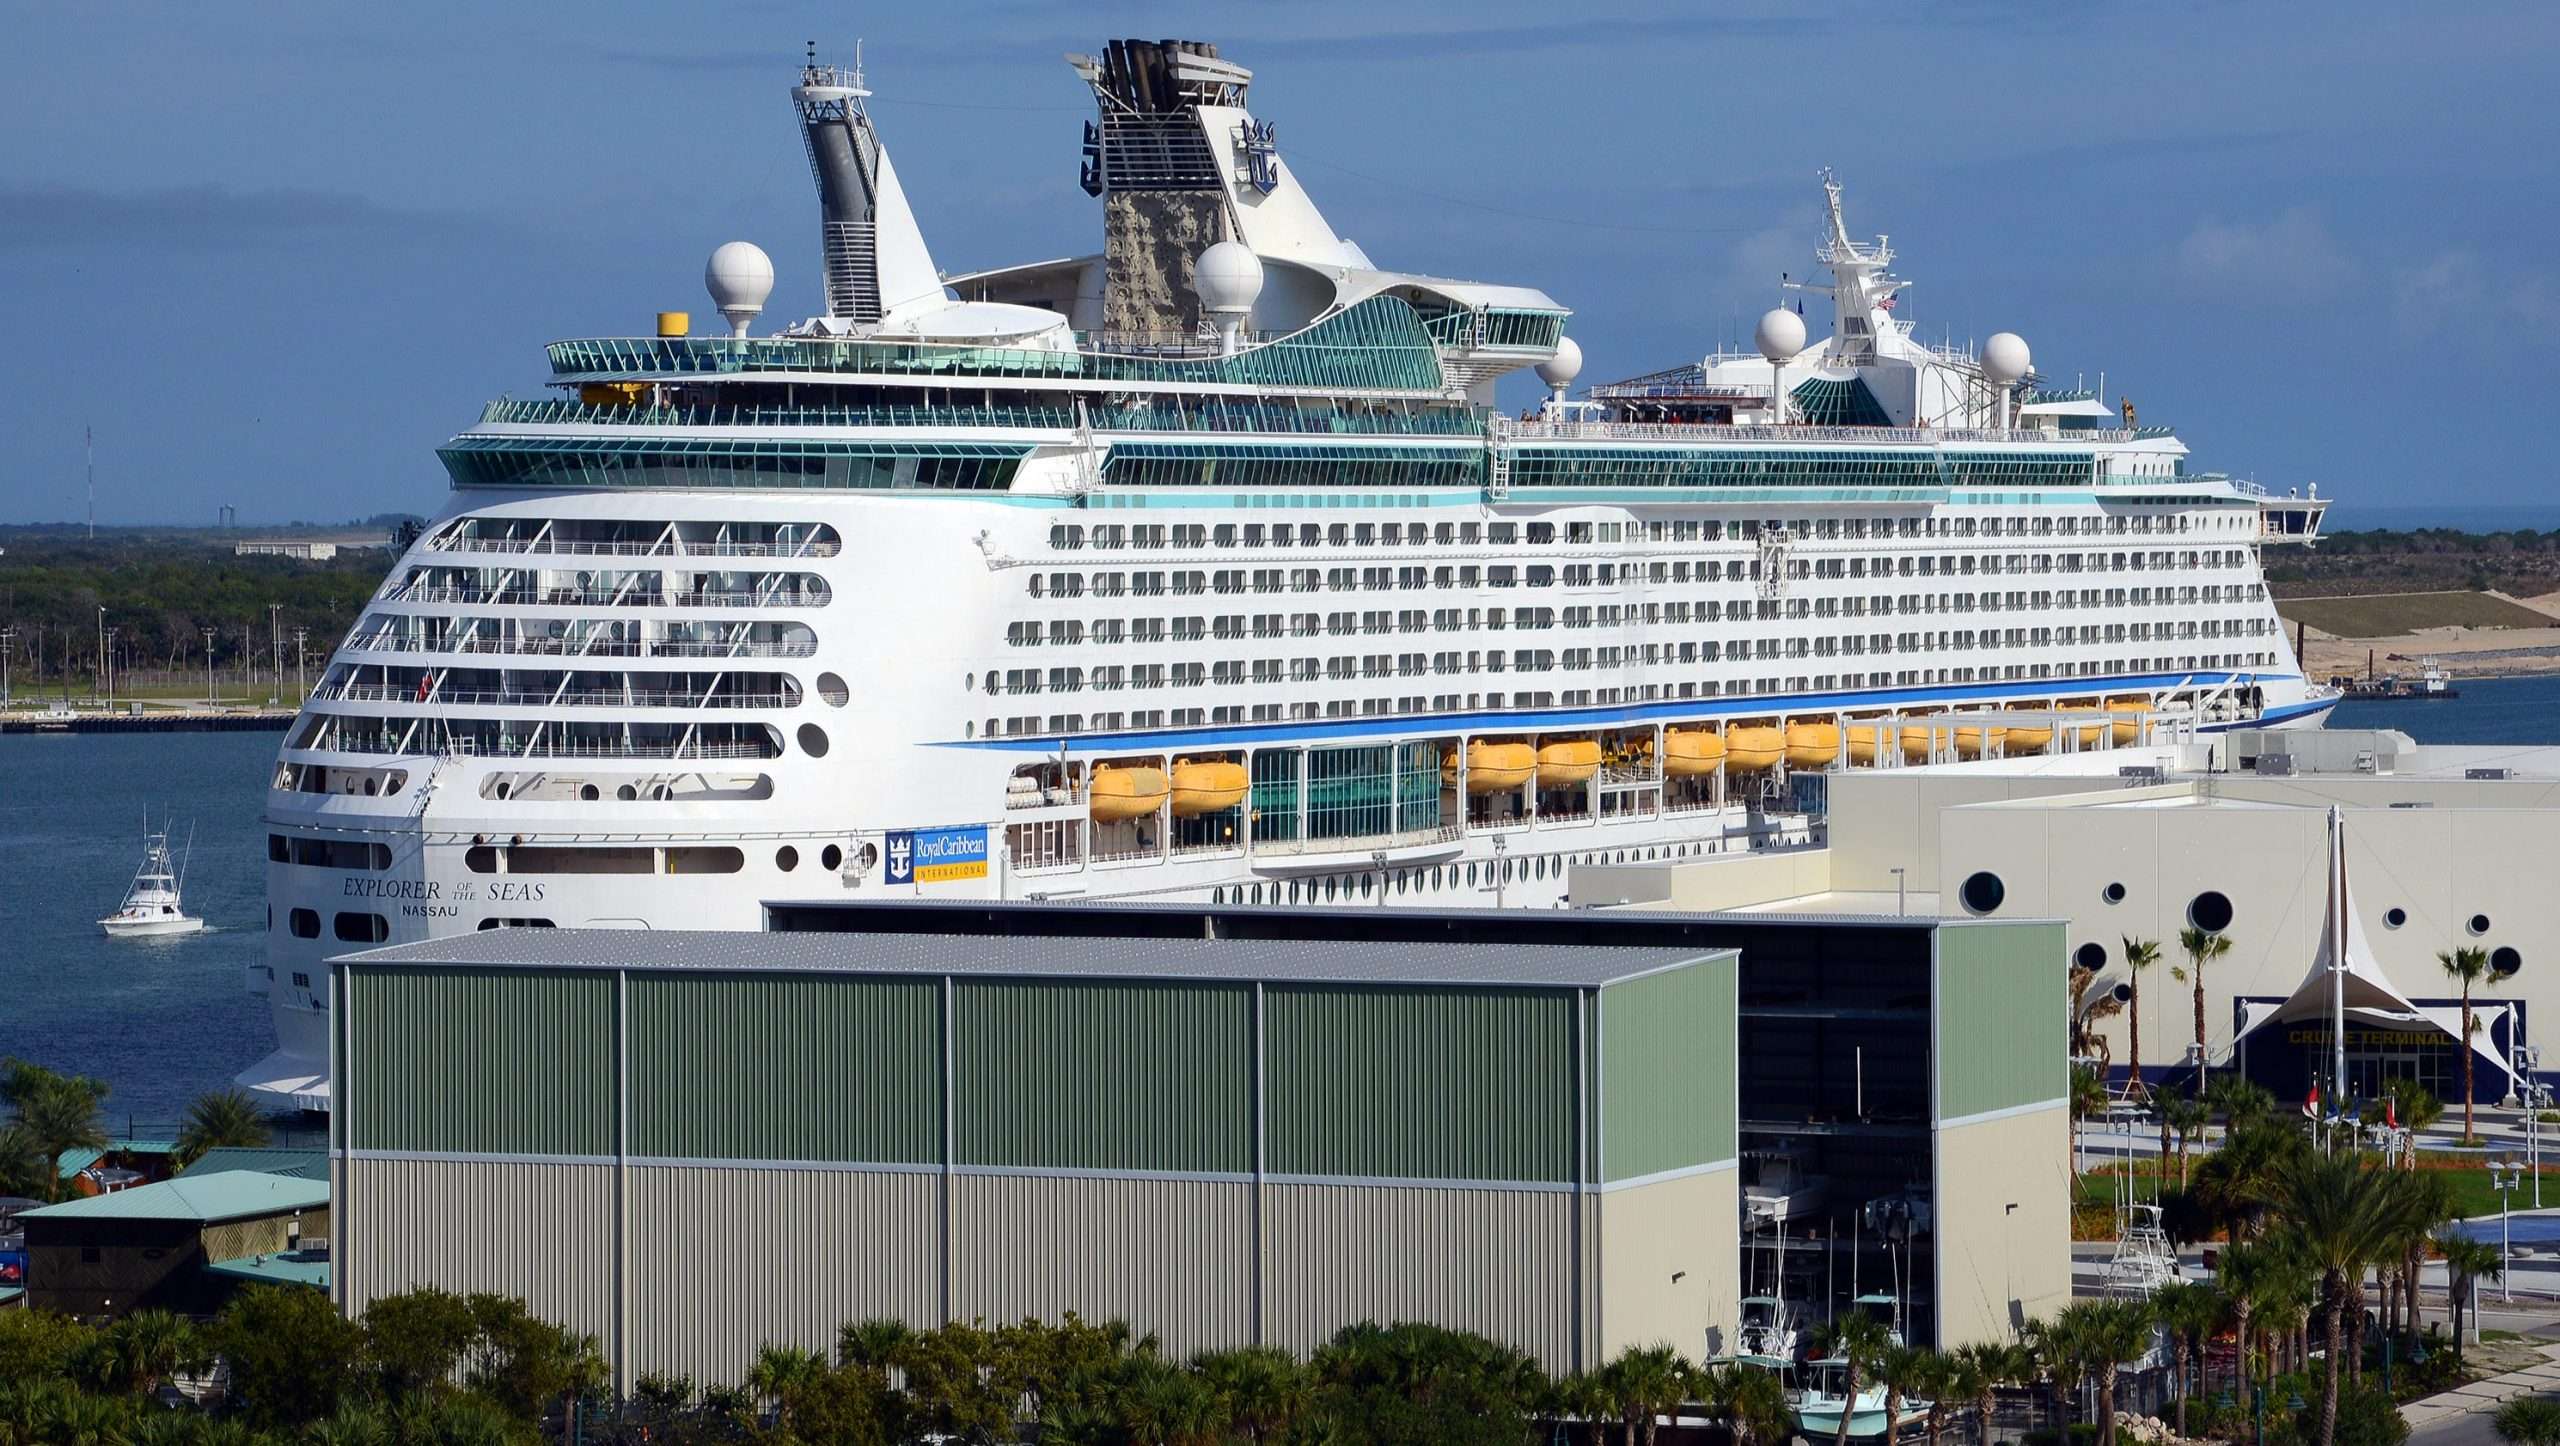 Photos: Five cruise ships dock at Port Canaveral